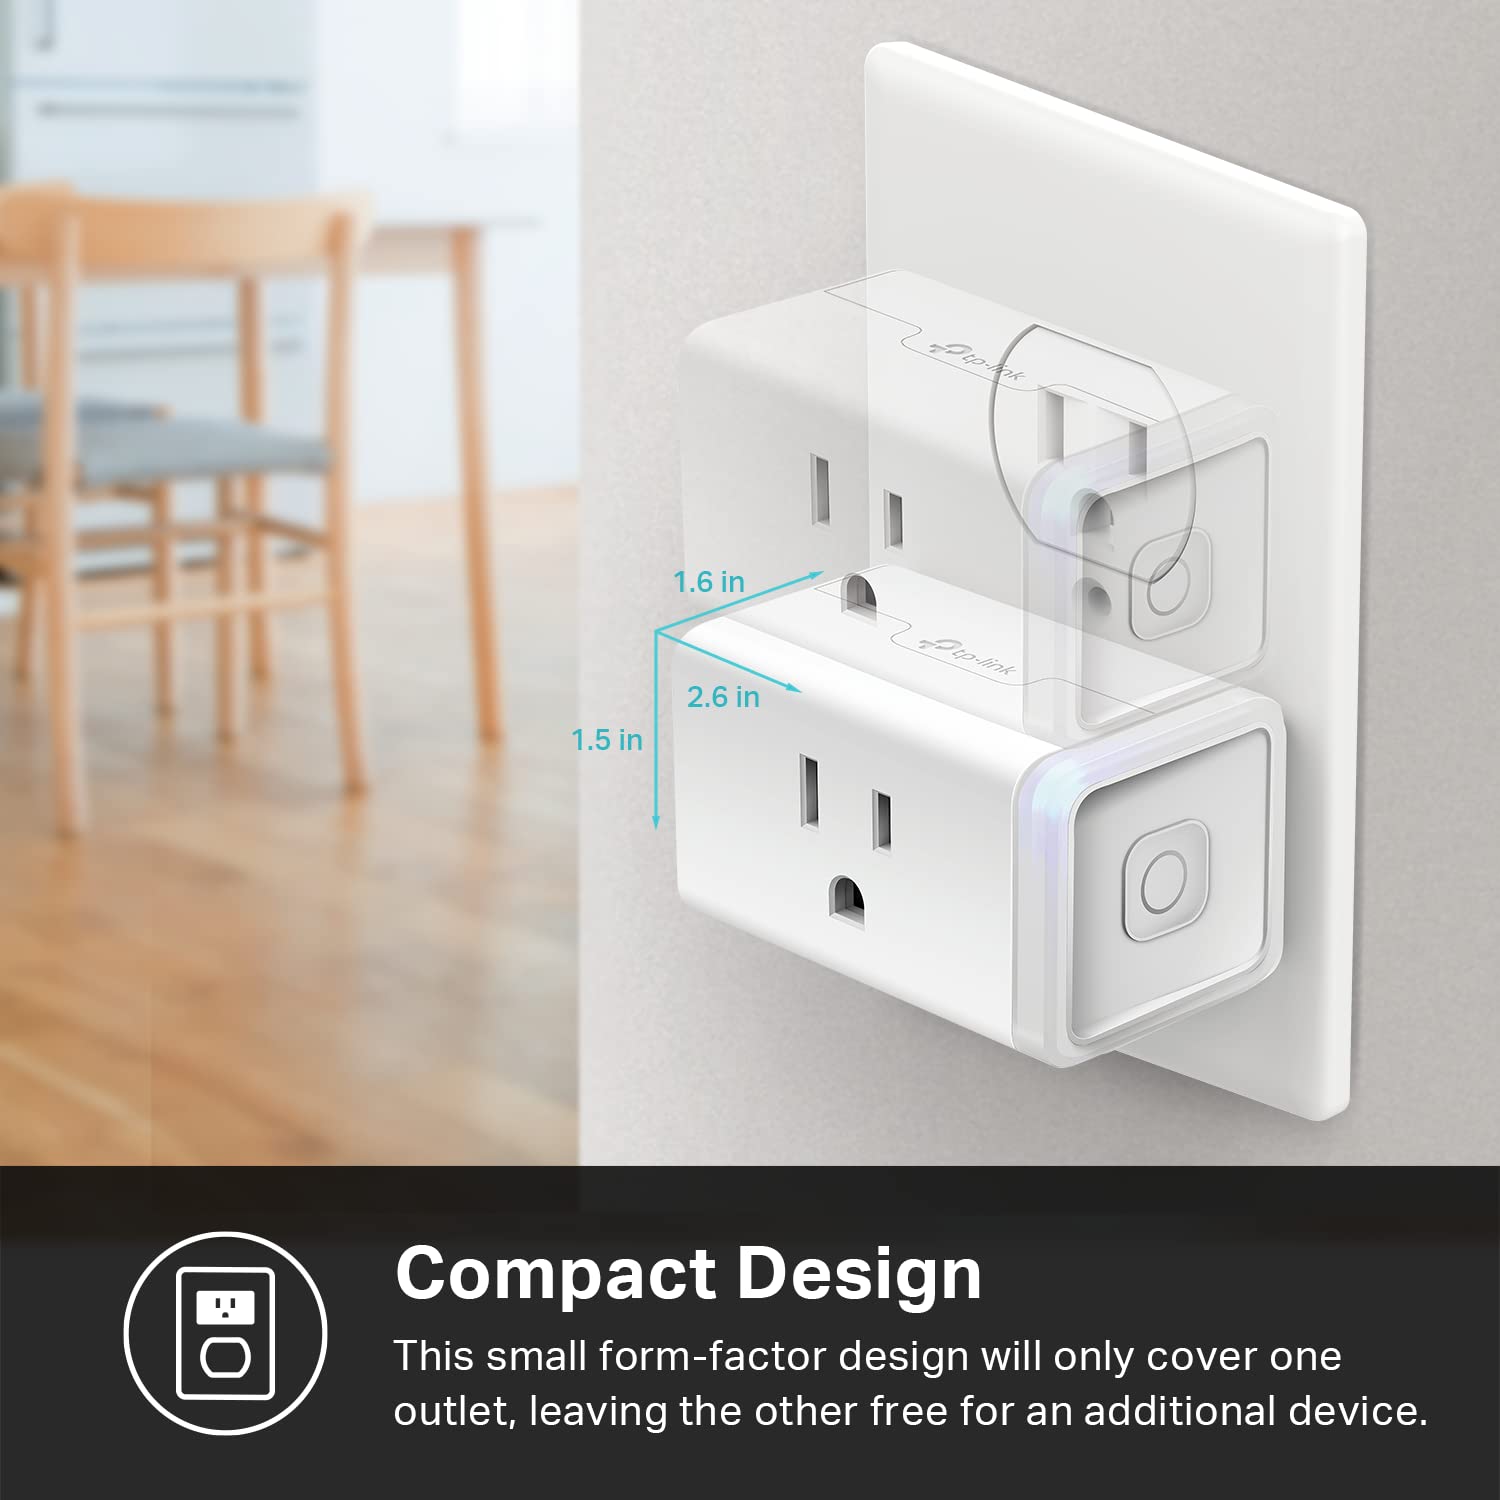 Kasa Smart Plug Mini 15A, Apple HomeKit Supported, Smart Outlet Works with Siri, Alexa & Google Home, UL Certified, App Control, Scheduling, Timer, 2.4G WiFi Only, 4-Pack (EP25P4), White